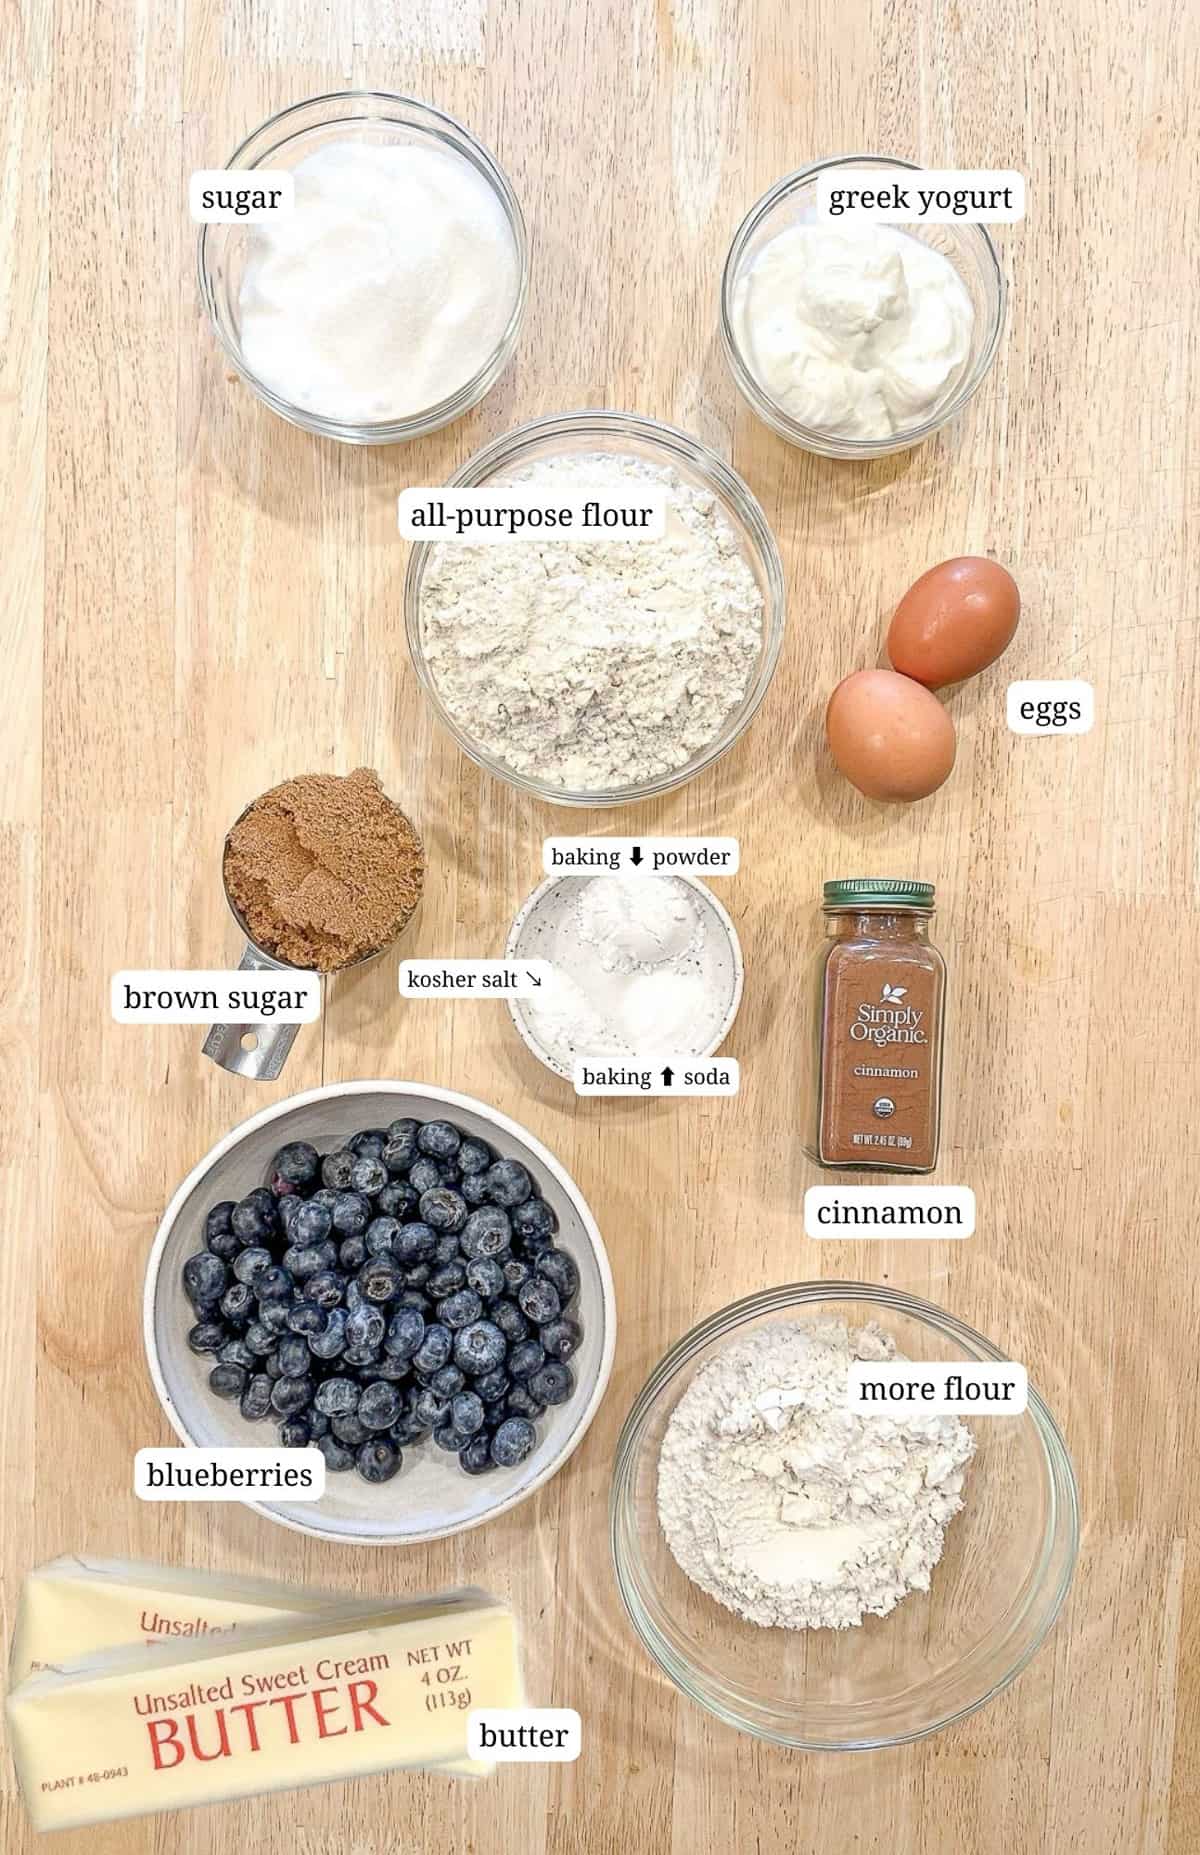 Labeled image of ingredients to make bakery style blueberry streusel muffins.